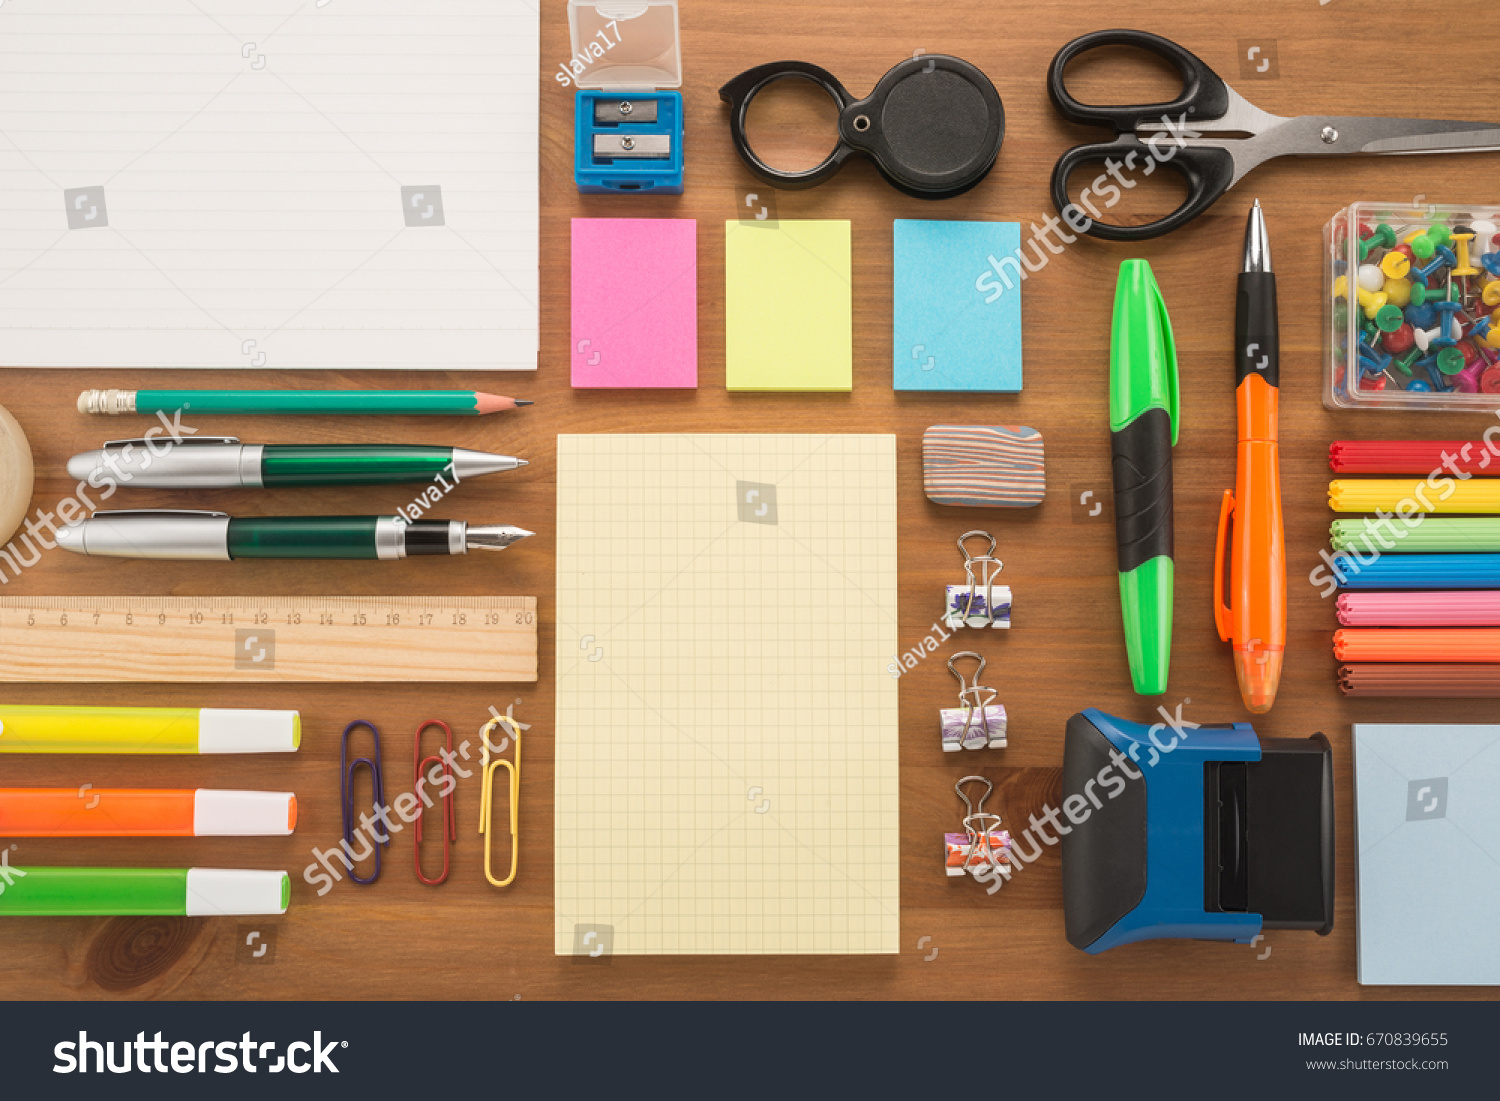 School office supplies on a table #670839655